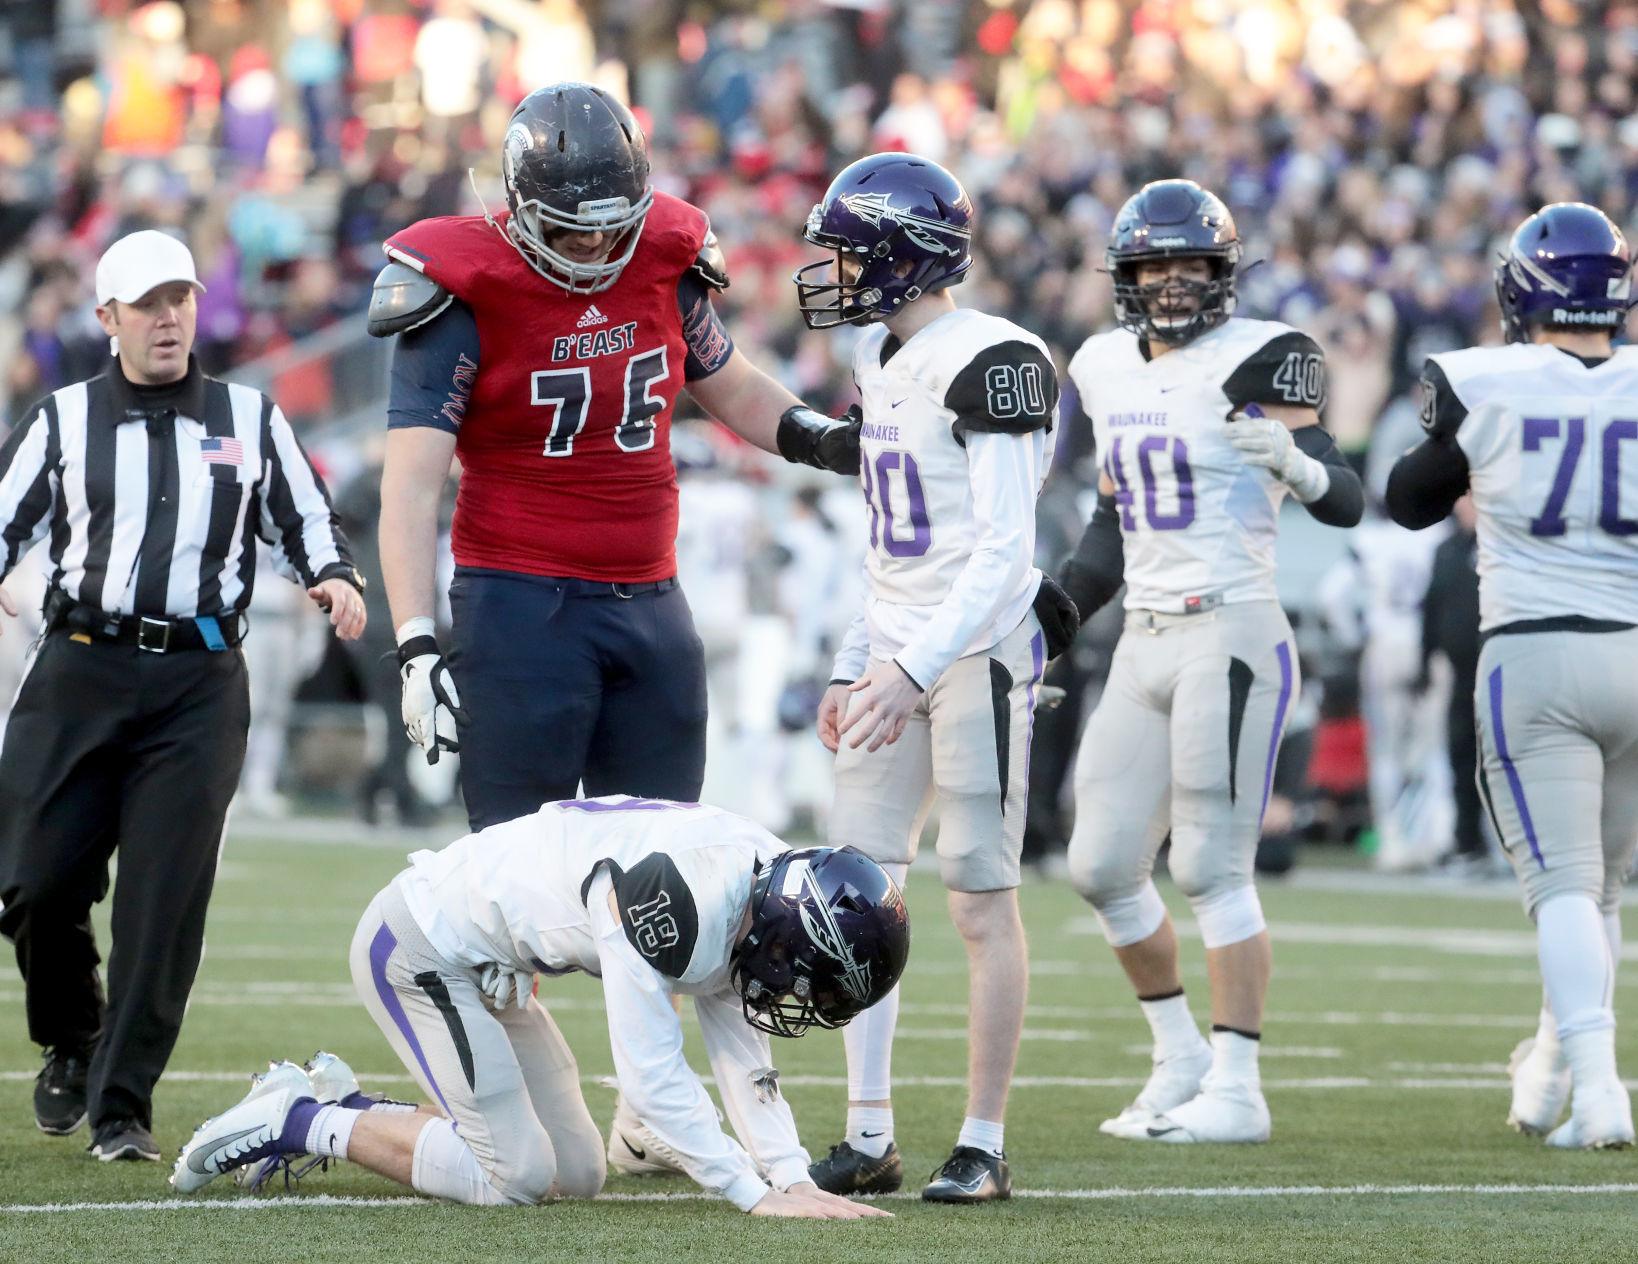 Waunakee comes up short in Division 2 state football title game | High